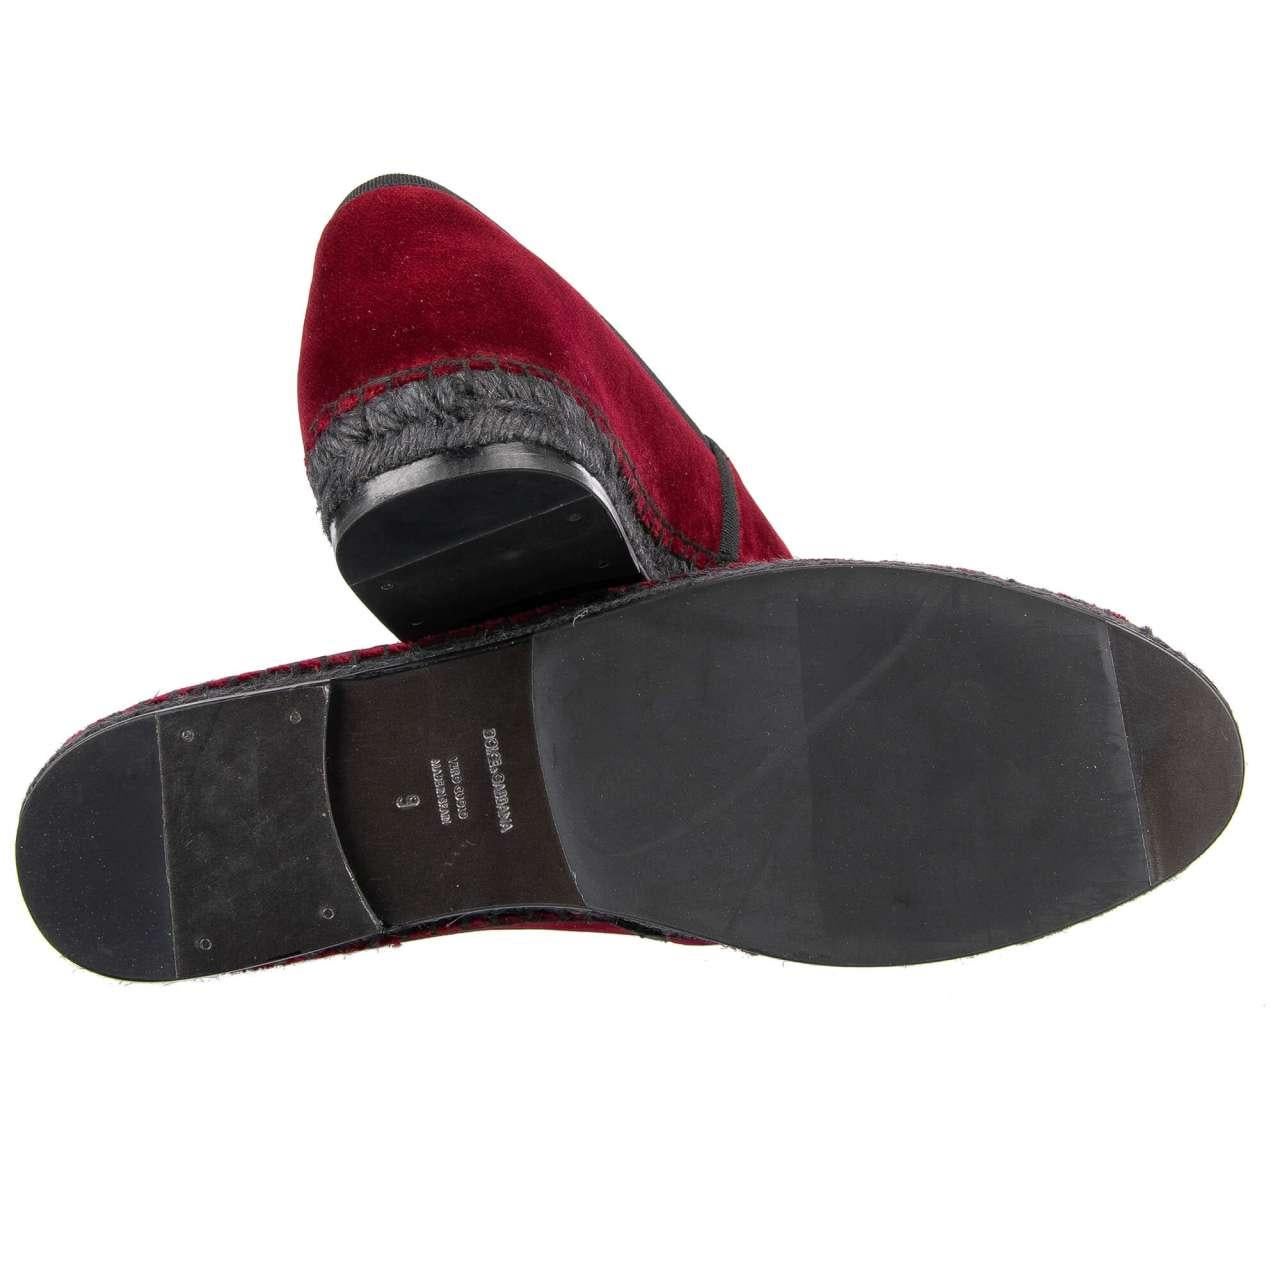 - Velvet Espadrilles shoes TREMITI in bordeaux red by DOLCE & GABBANA - MADE IN SPAIN - New with Box - Model: A50037-A6808-80308 - Material: 90% Cotton, 10% Nylon - Sole: Leather / Rubber - Color: Bordeaux Red / Black - Leather footbed - Sizes